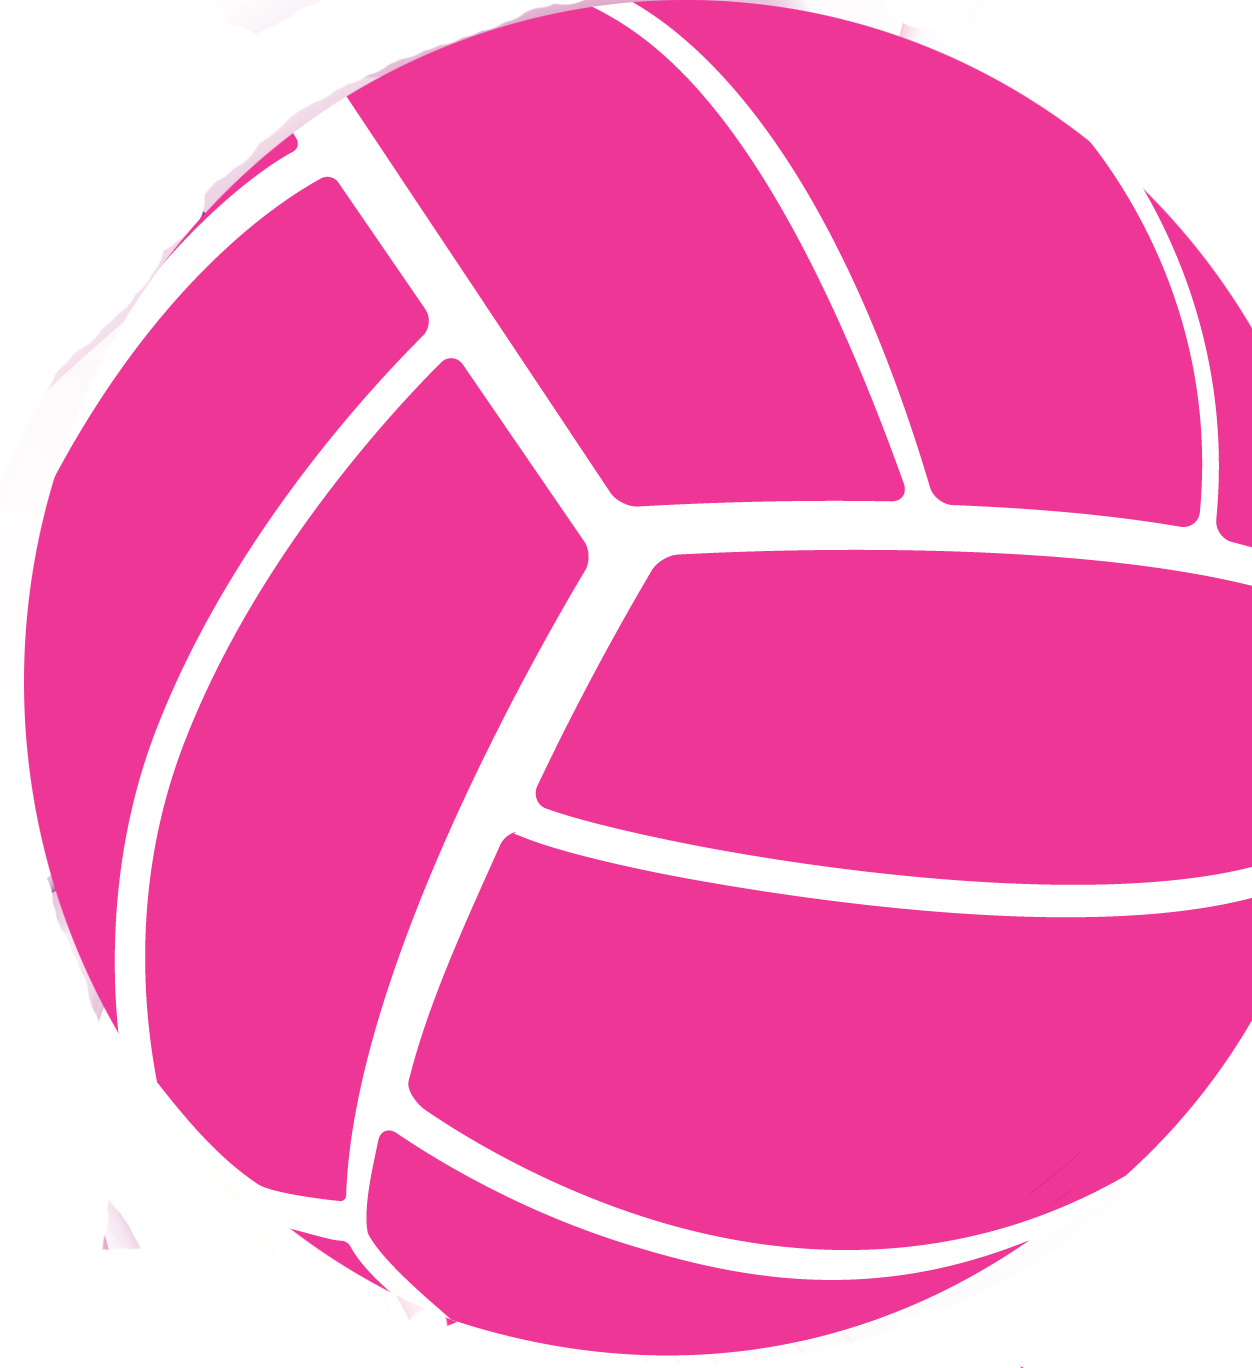 8066 Volleyball free clipart.